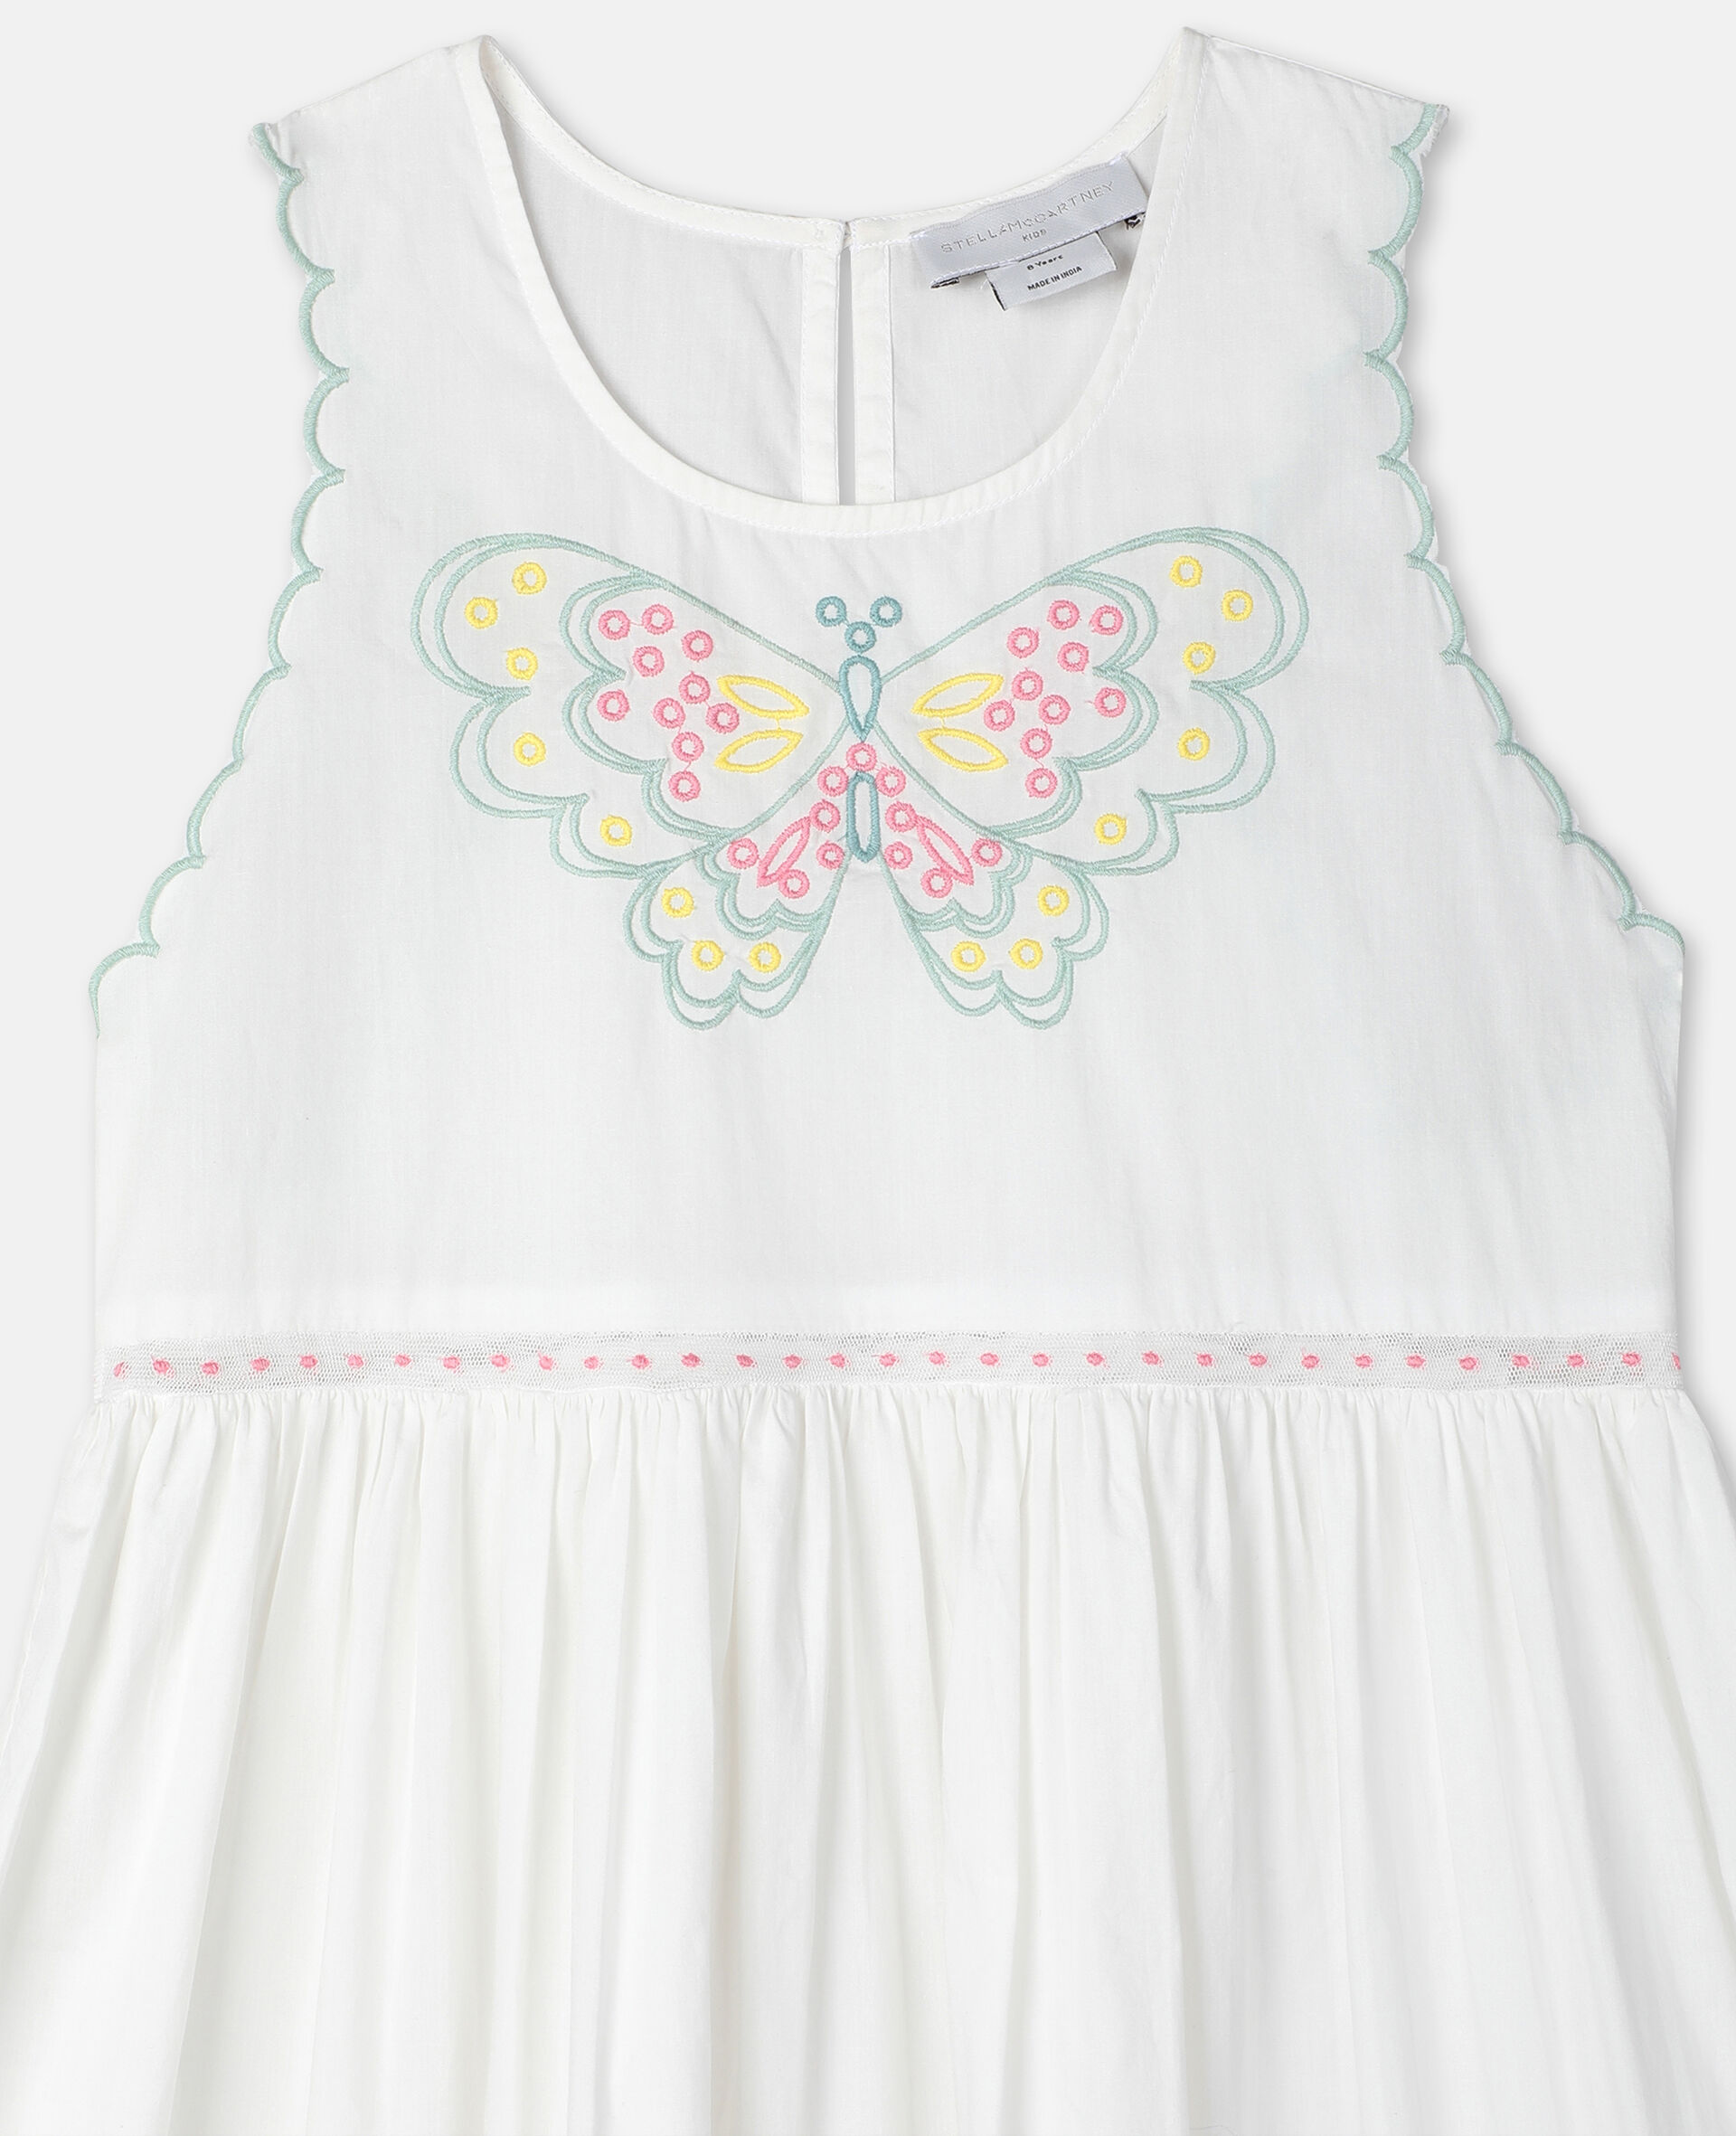 Embroidered Butterfly Cotton Dress-White-large image number 2